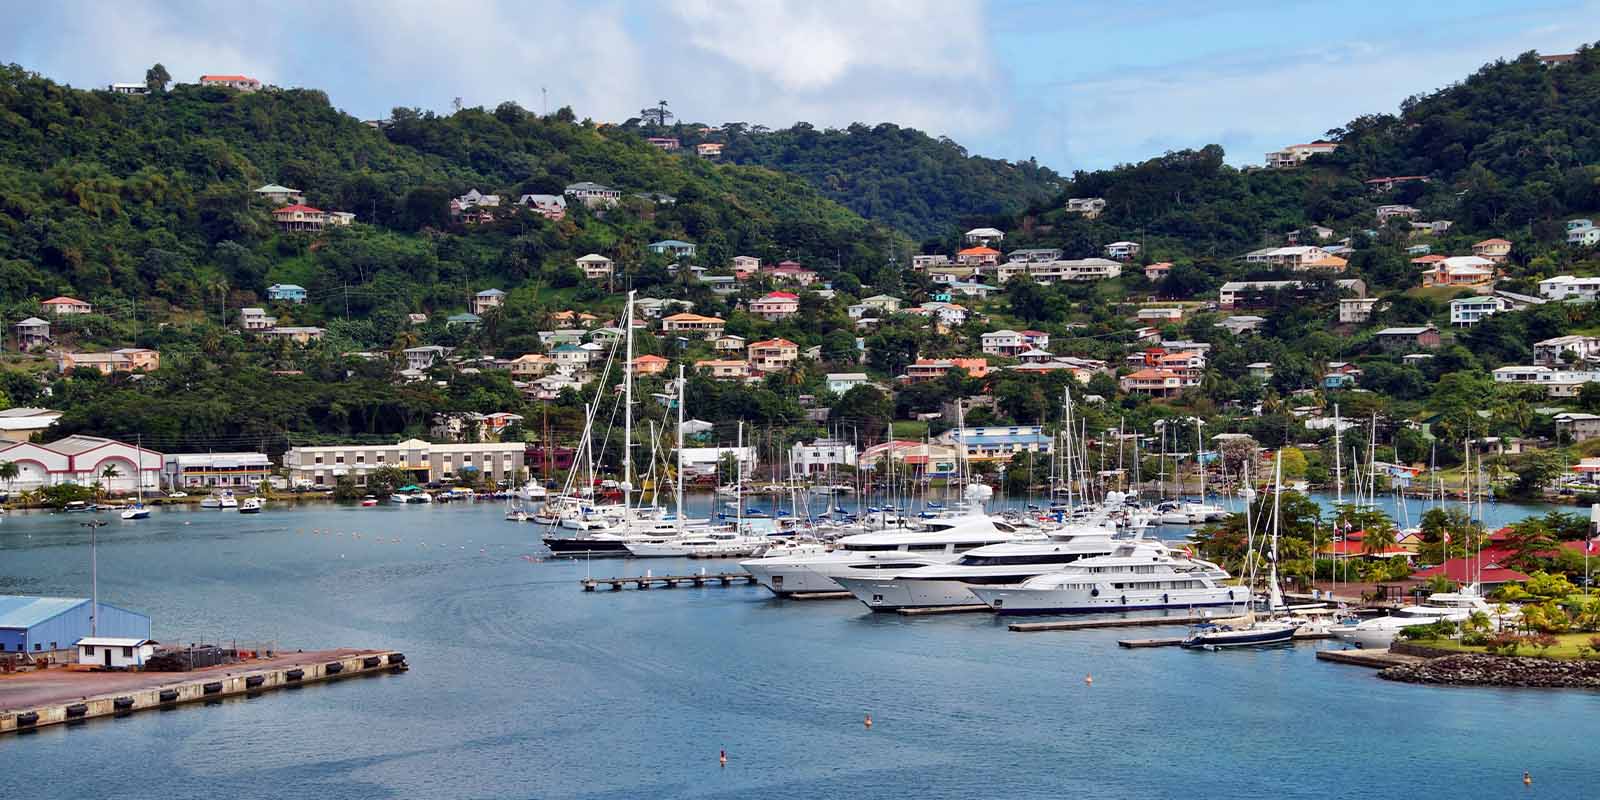 Grenada has excellent financial regulations and is home to a number of Canadian banks